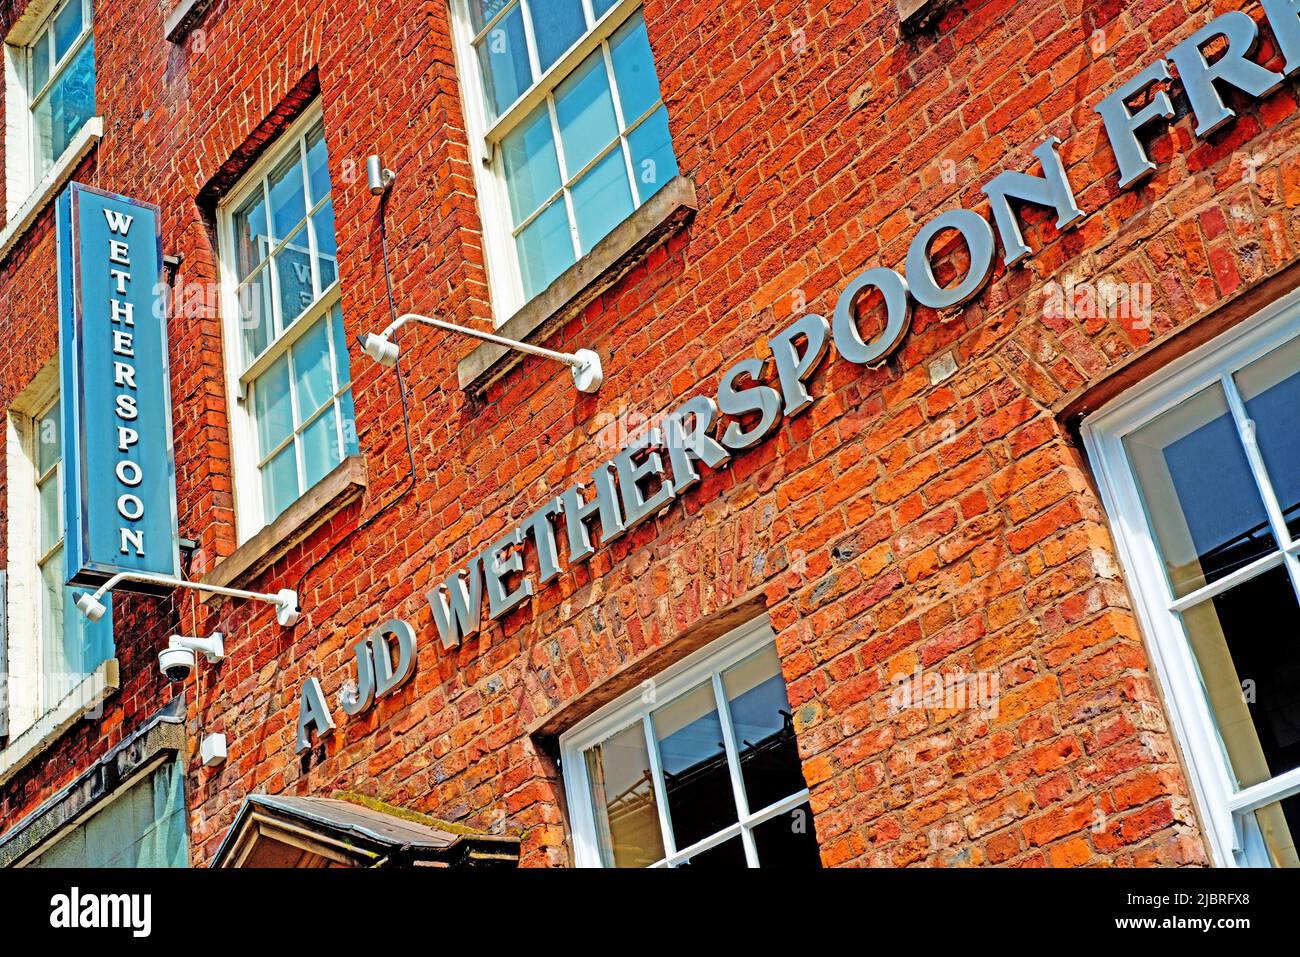 The Waterhouse, A JD Wetherspoons Pub, Manchester, England Stock Photo